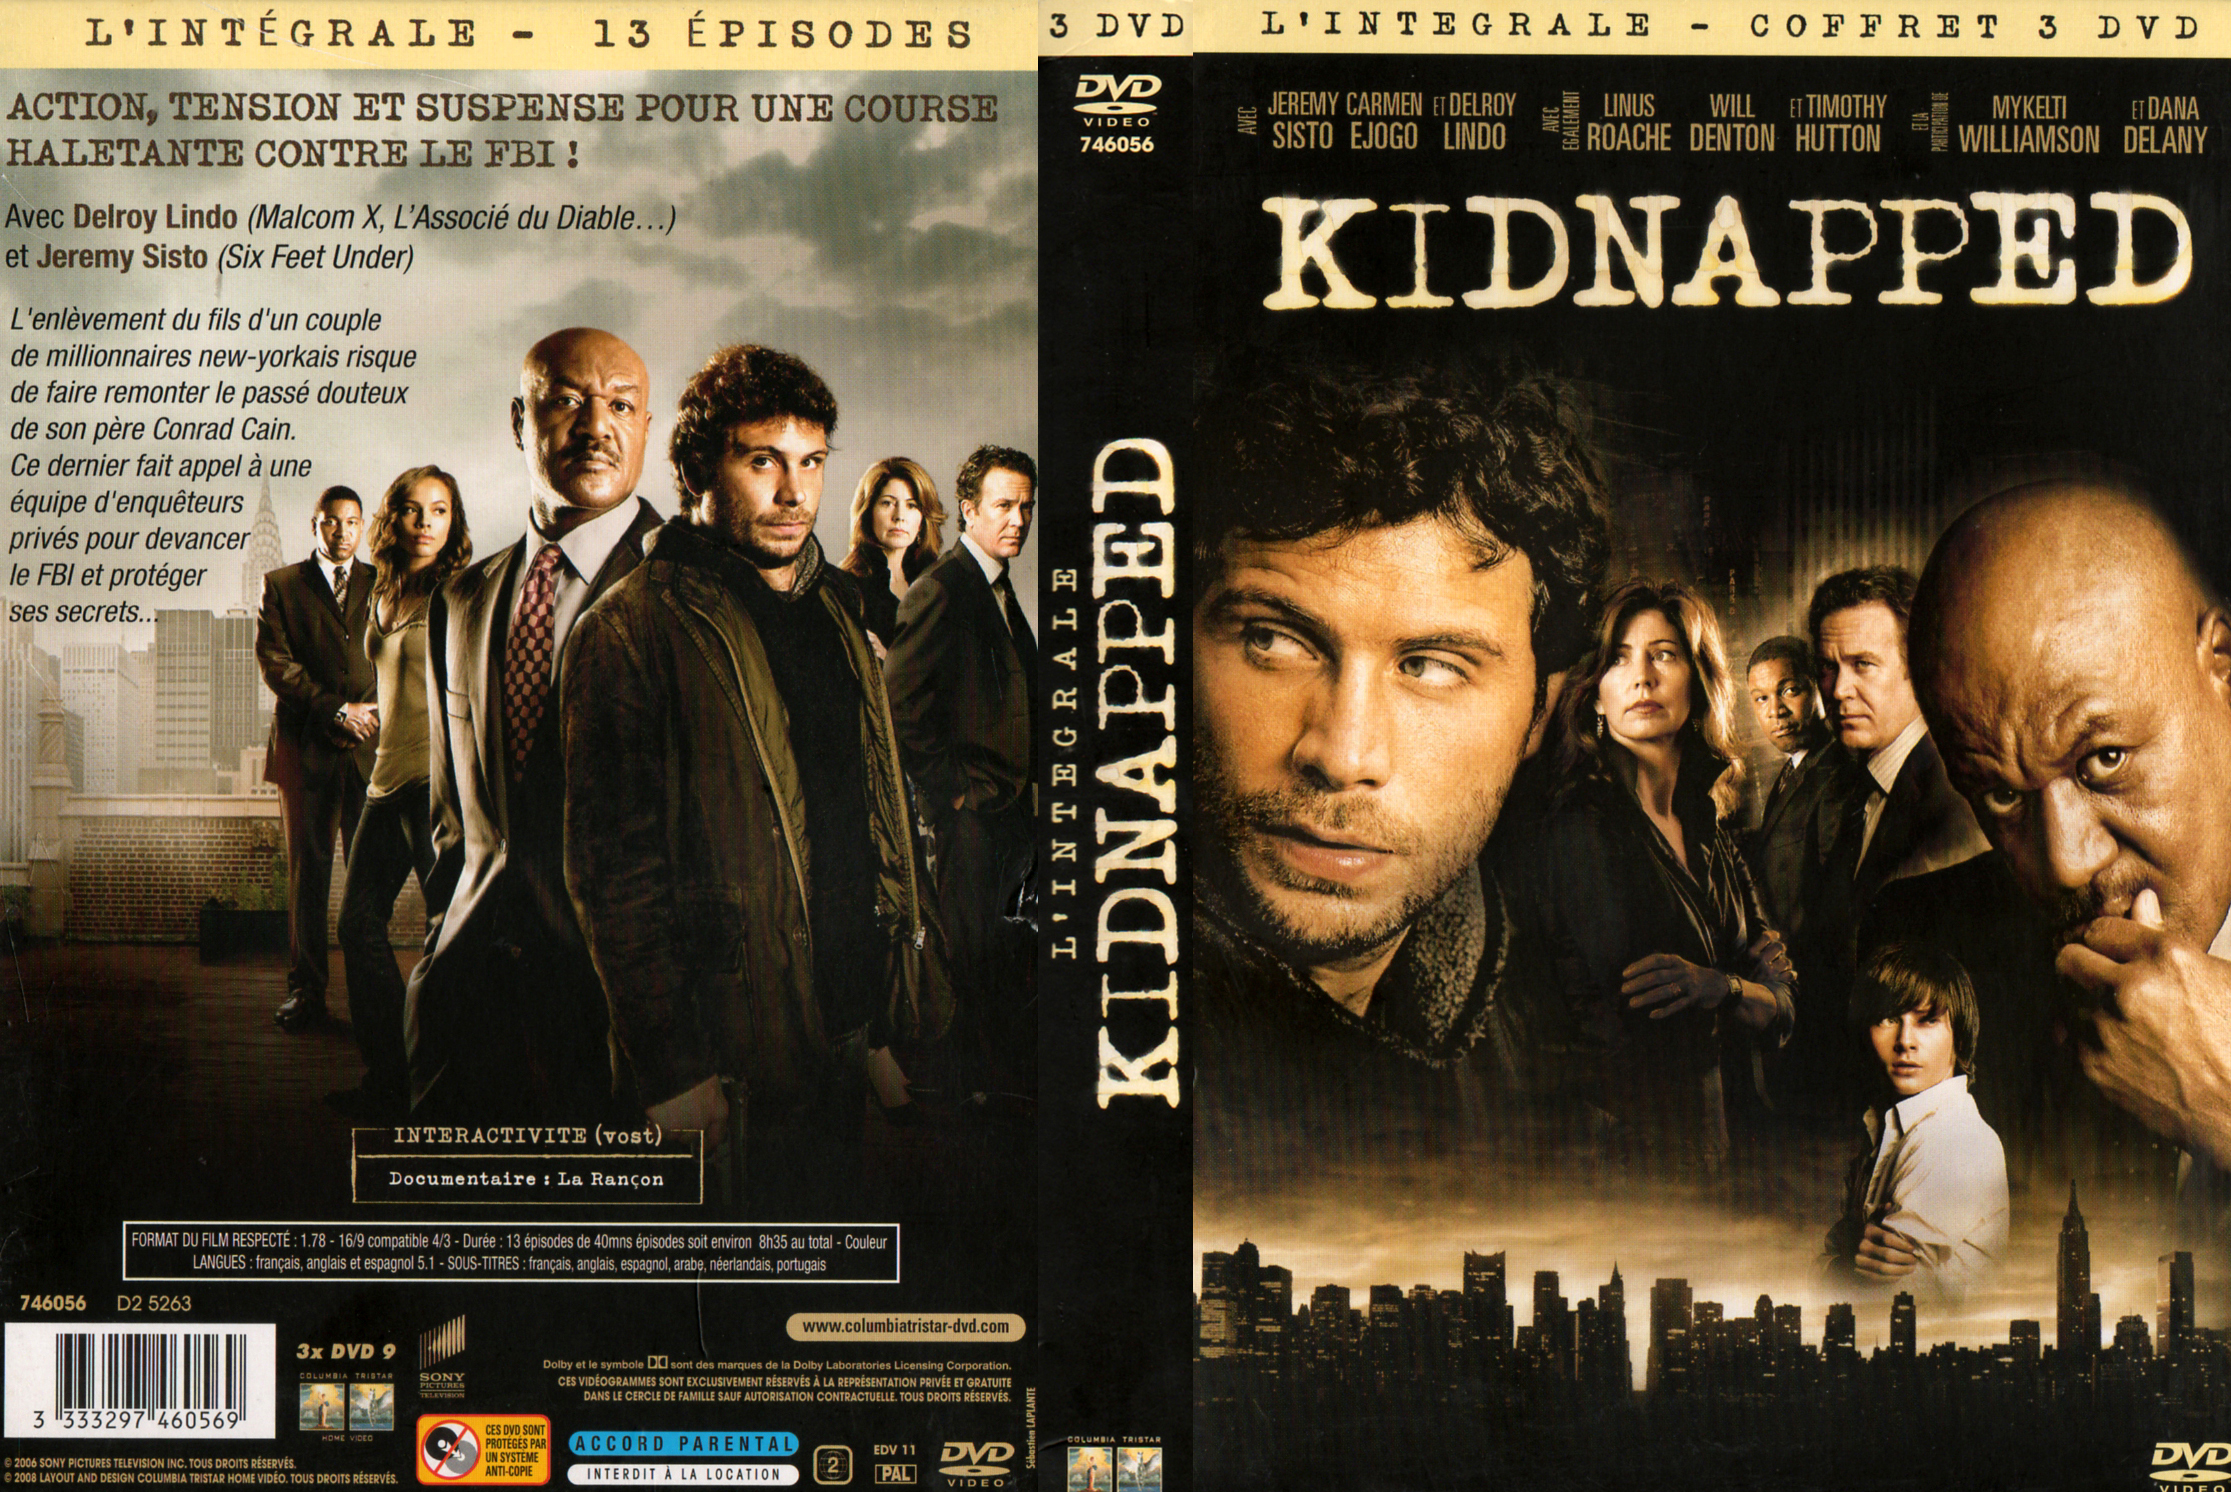 Jaquette DVD Kidnapped